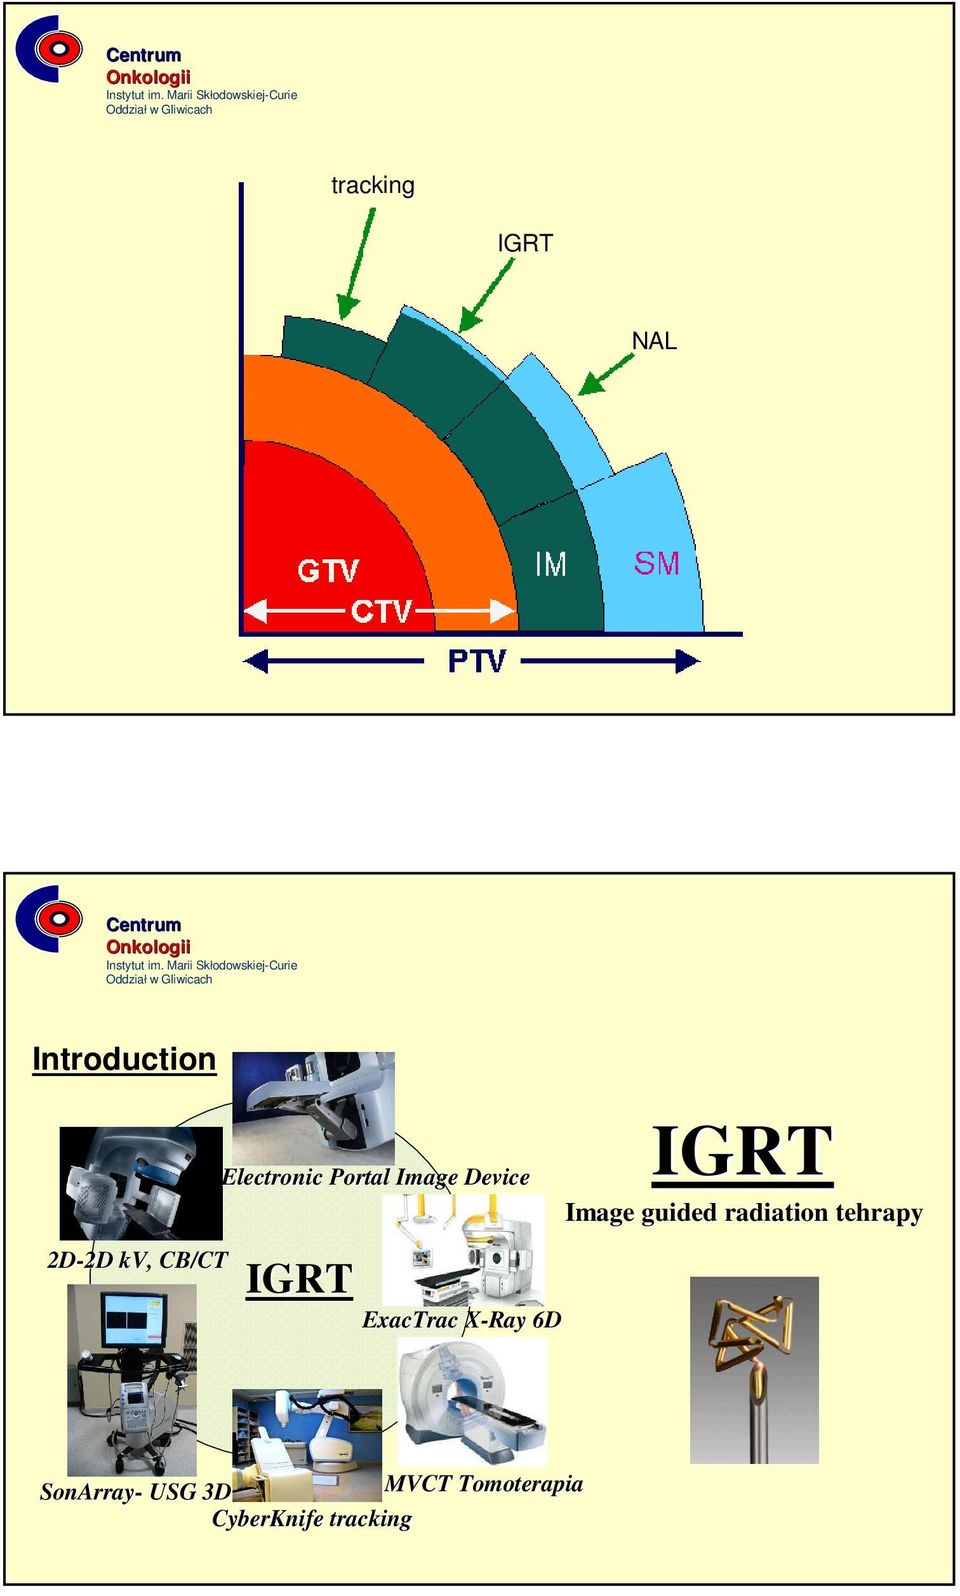 X-Ray X 6D IGRT Image guided radiation tehrapy